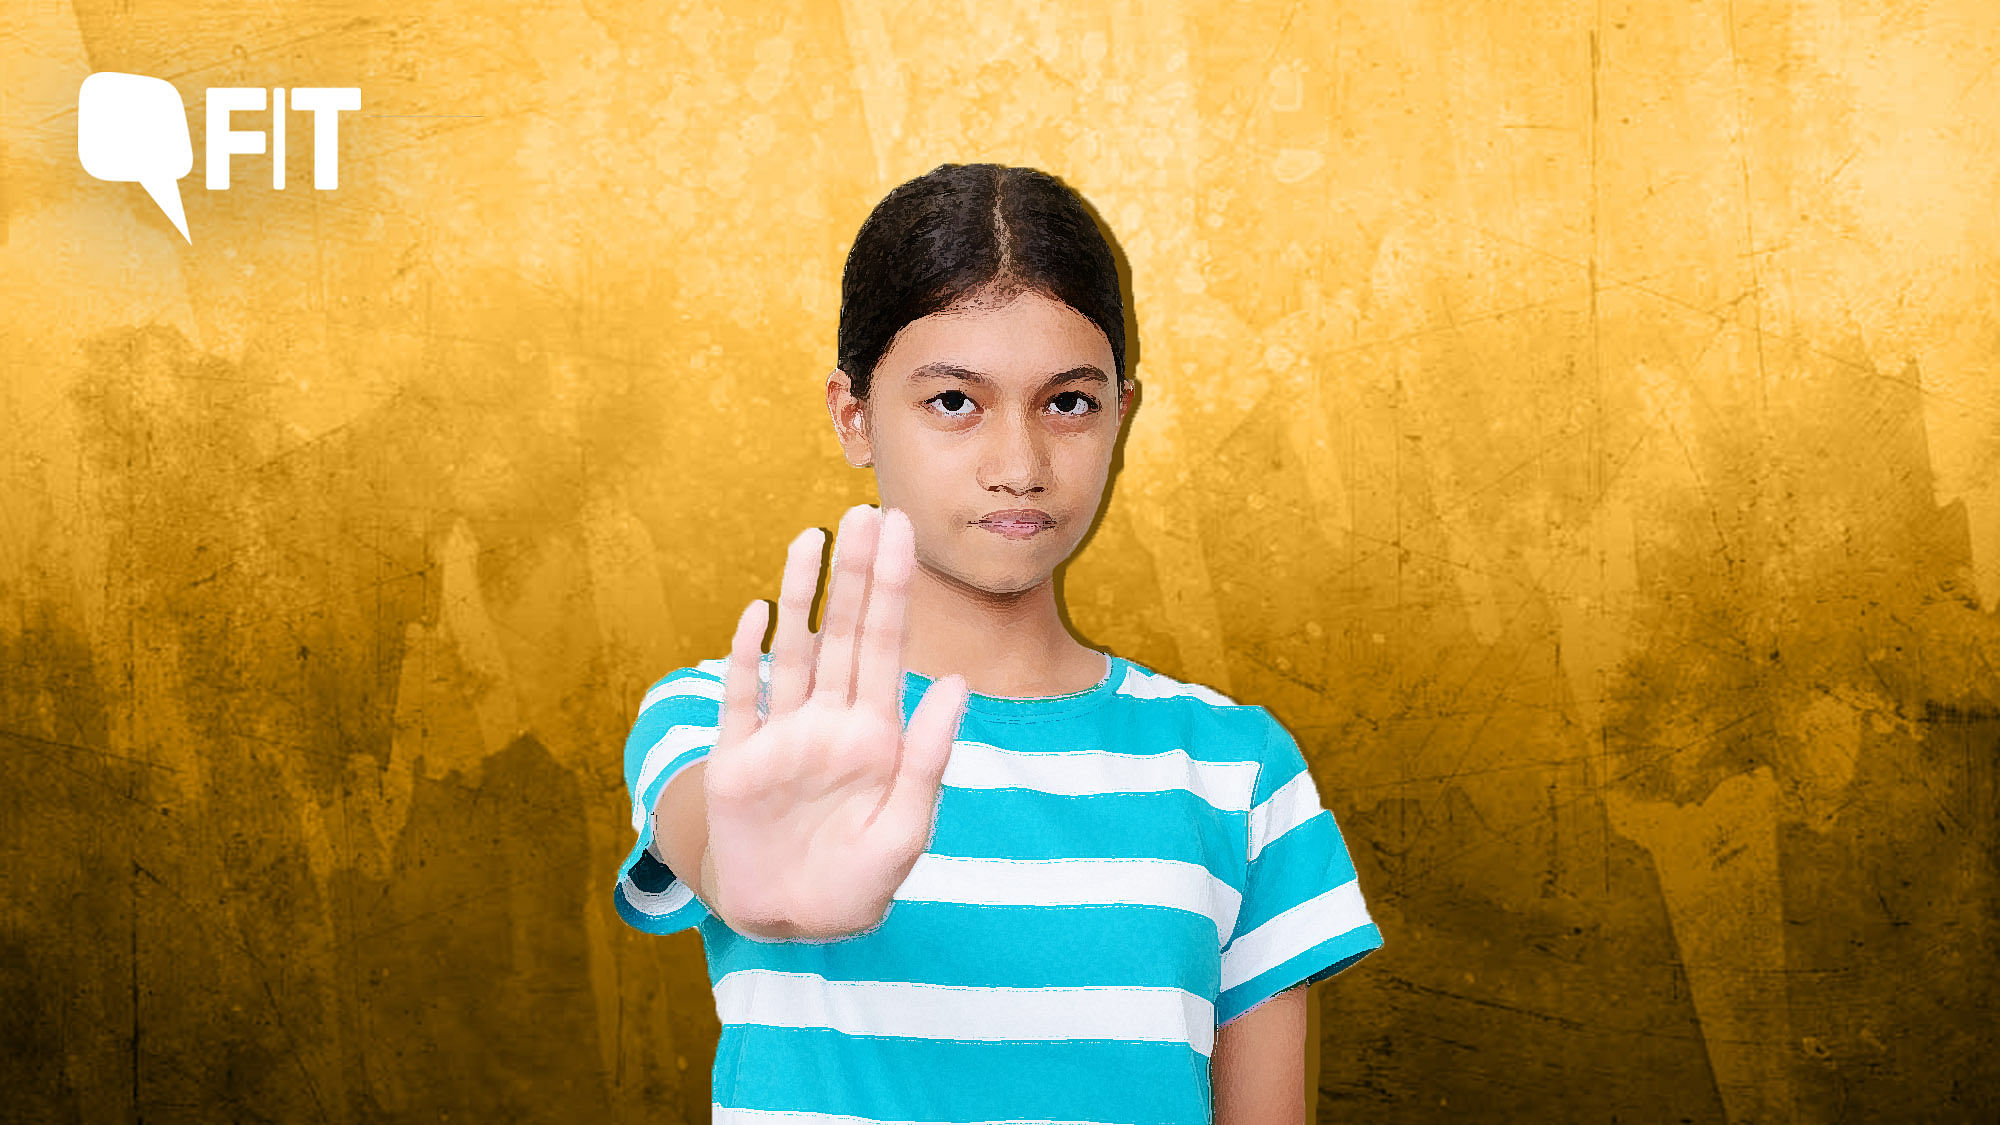 Teaching boys and girls early on to respect each other goes a long way in building consent culture and eventually addressing gender-based violence.